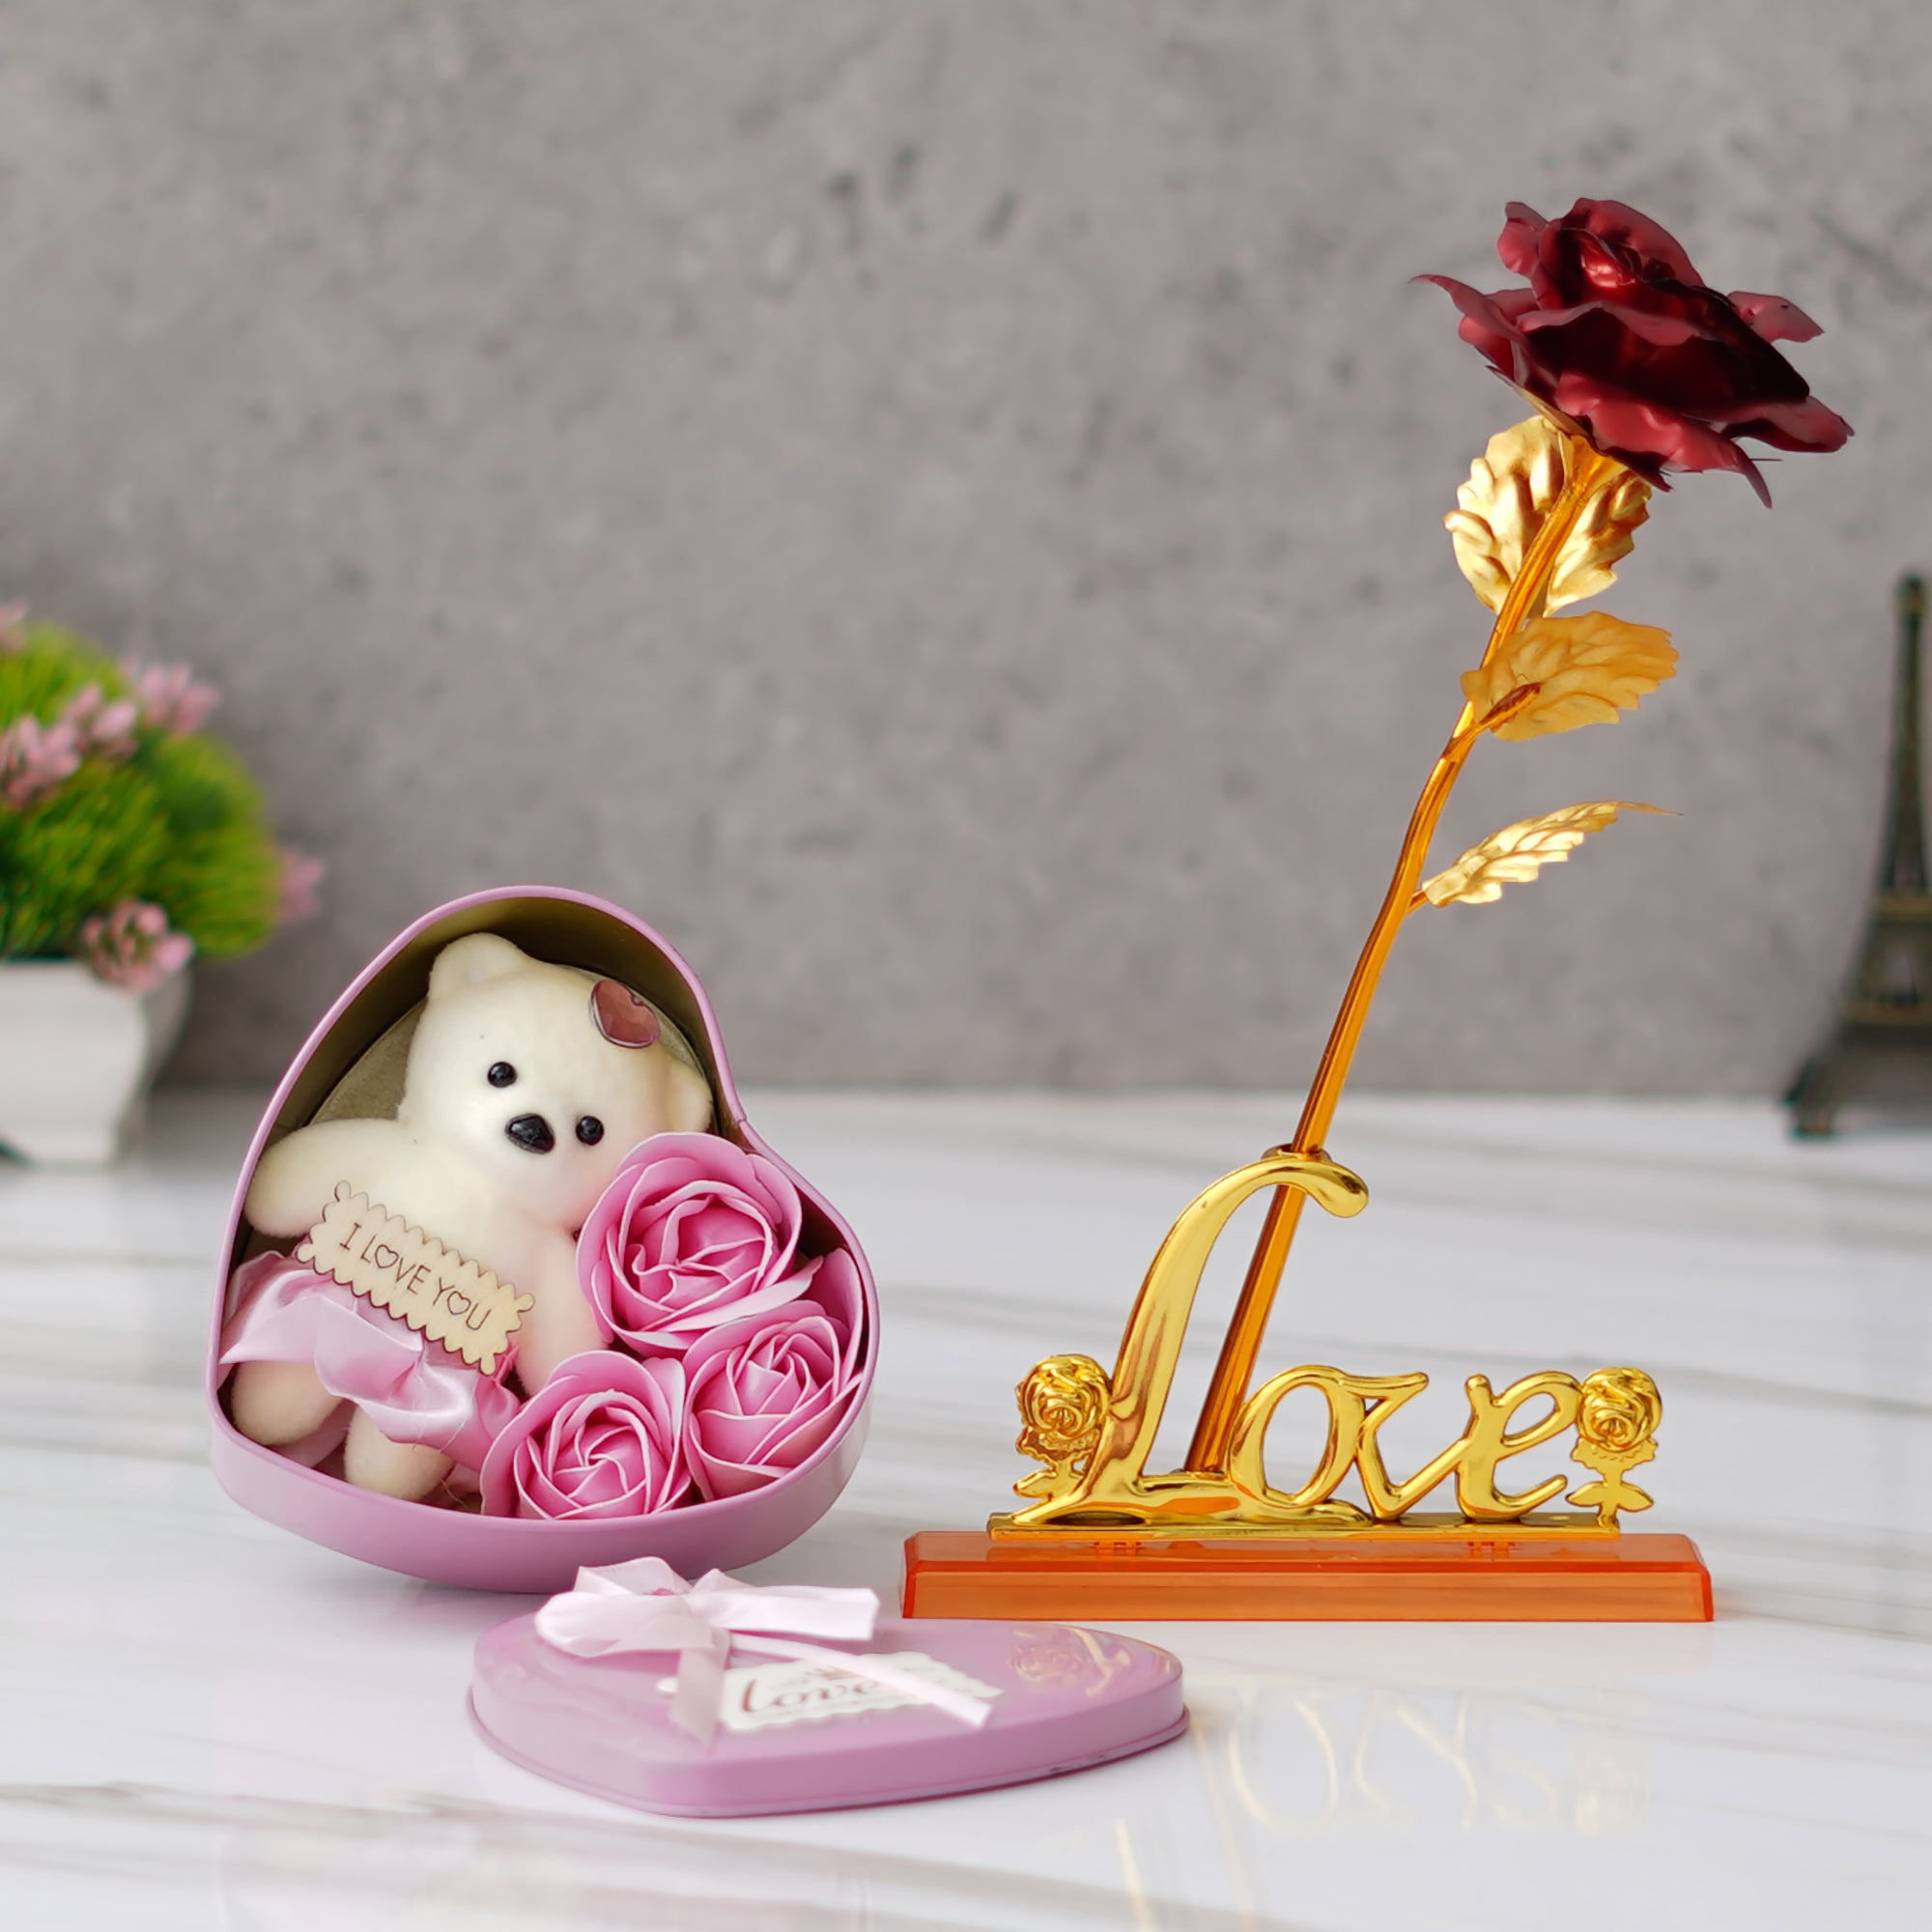 Valentine Combo of Love Golden Red Rose Table Decor Gift Set Showpiece, Pink Heart Shaped Gift Box with Teddy and Roses